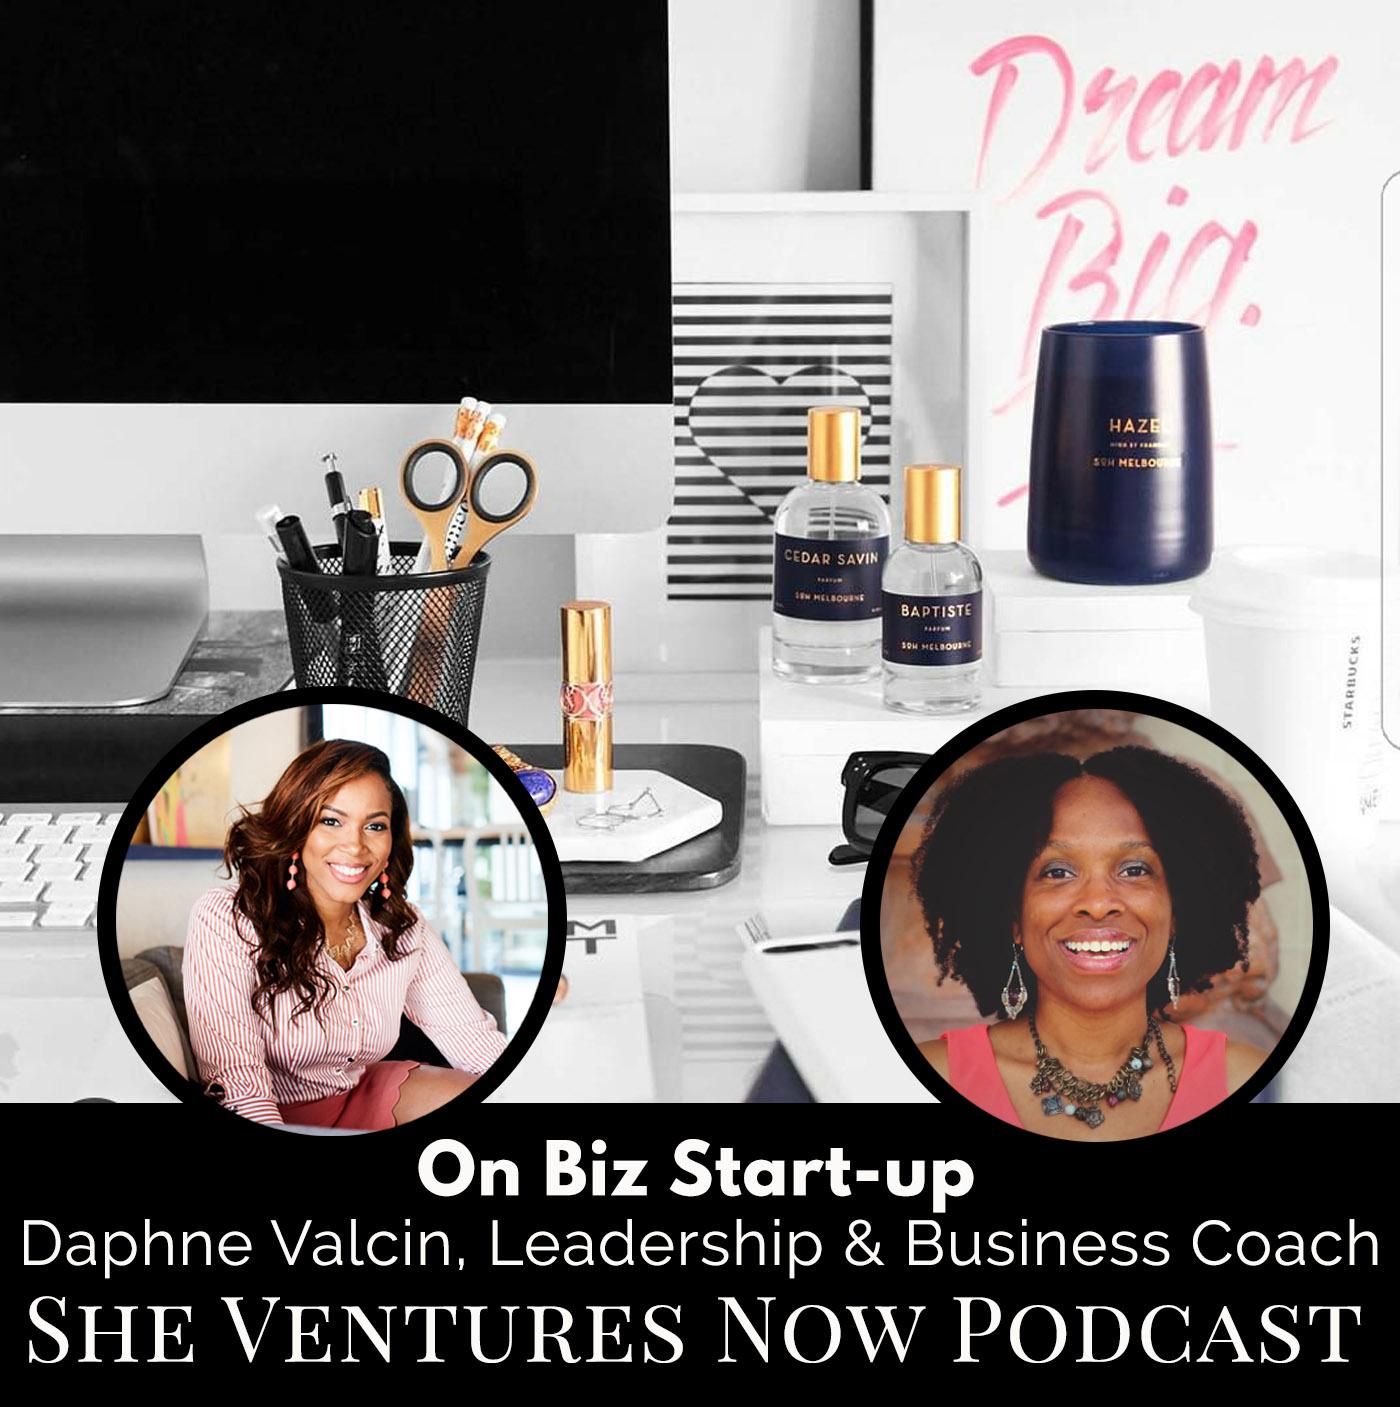 Interview with Daphne Valcin, Leadership & Business Coach